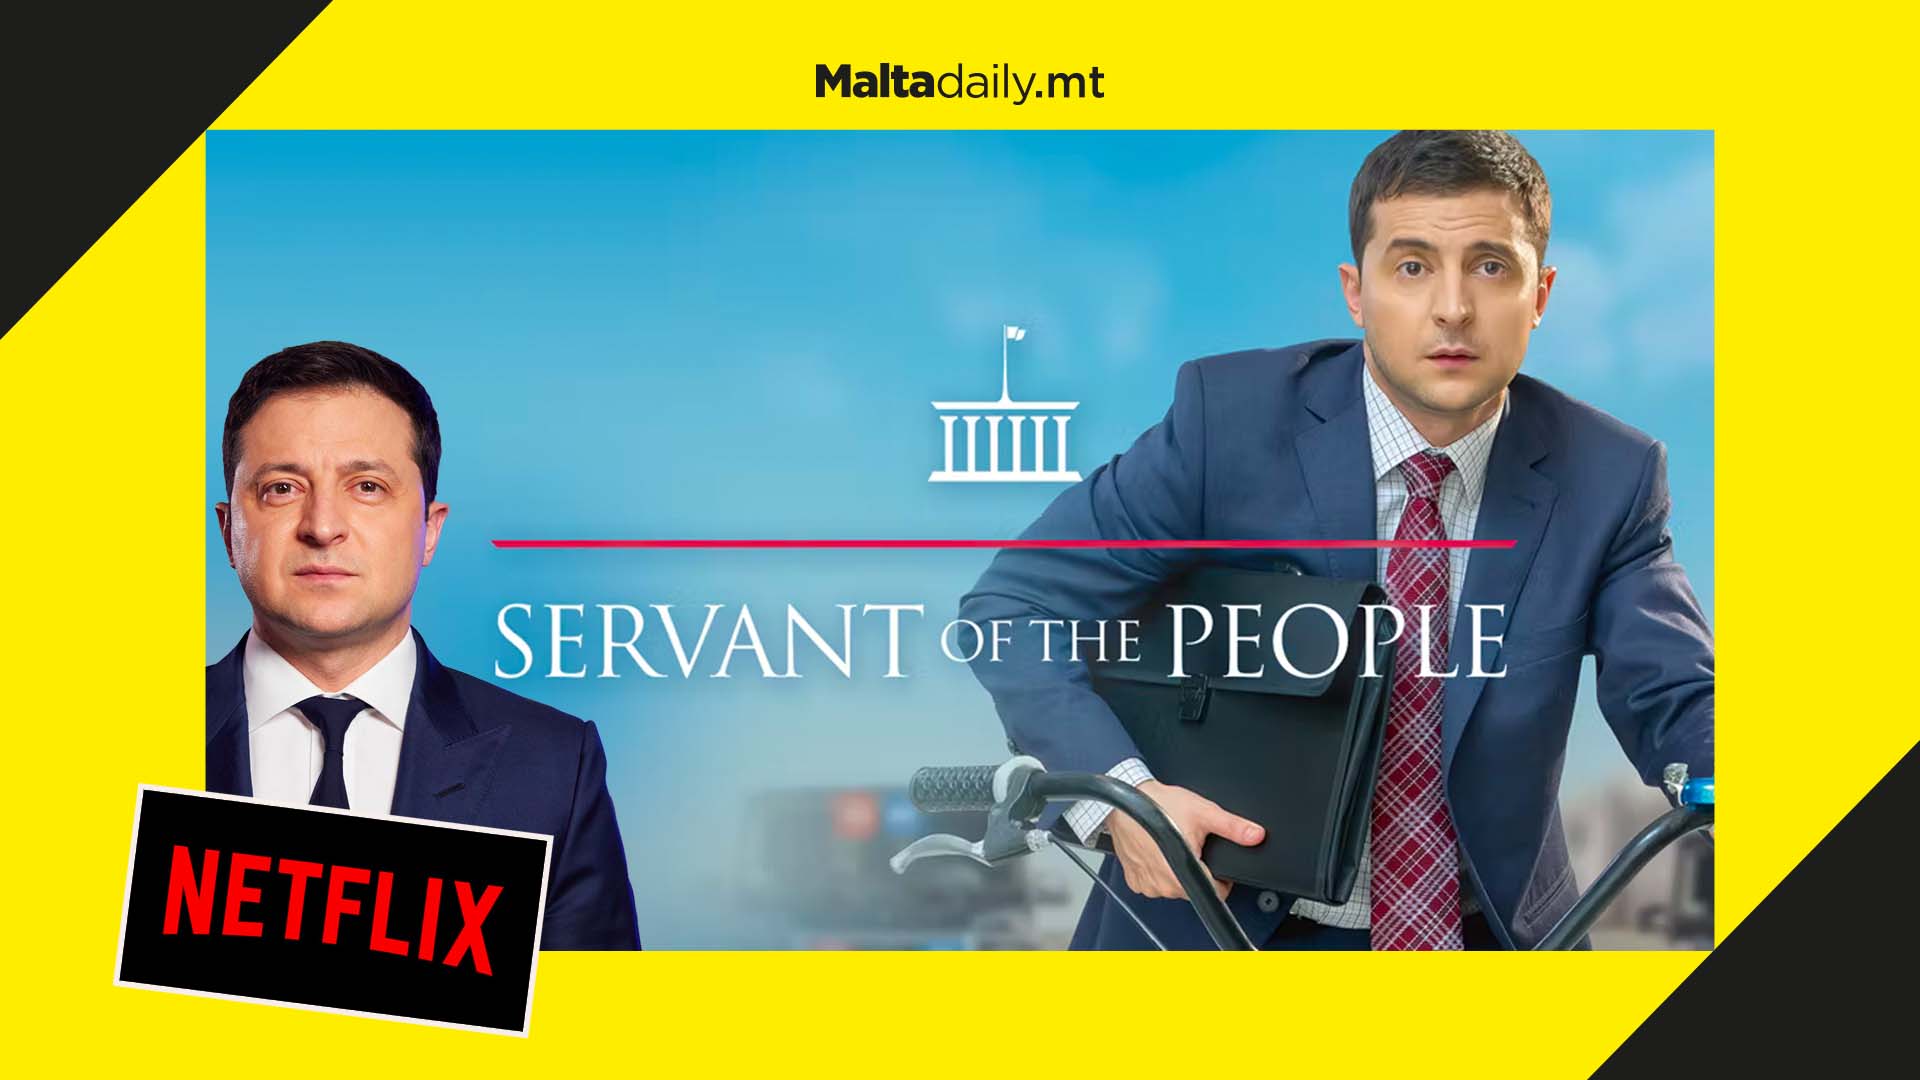 Netflix adds Volodymyr Zelenskyy’s ‘Servant of the People’ for streaming